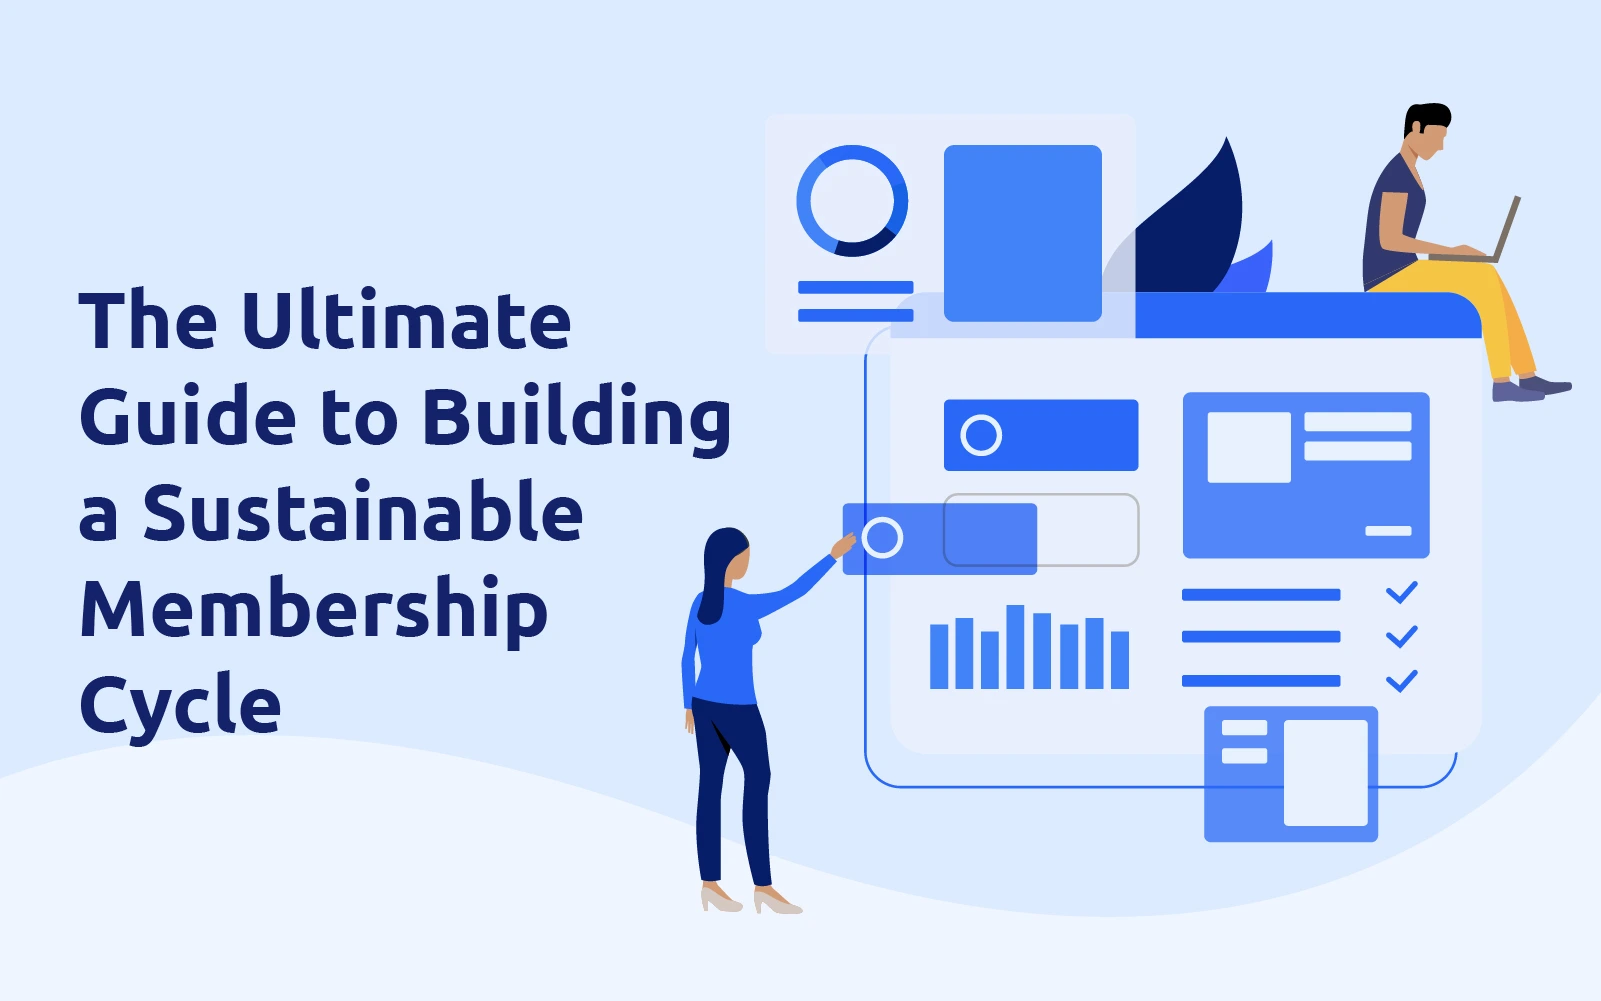 The Ultimate Guide to Building a Sustainable Membership Cycle